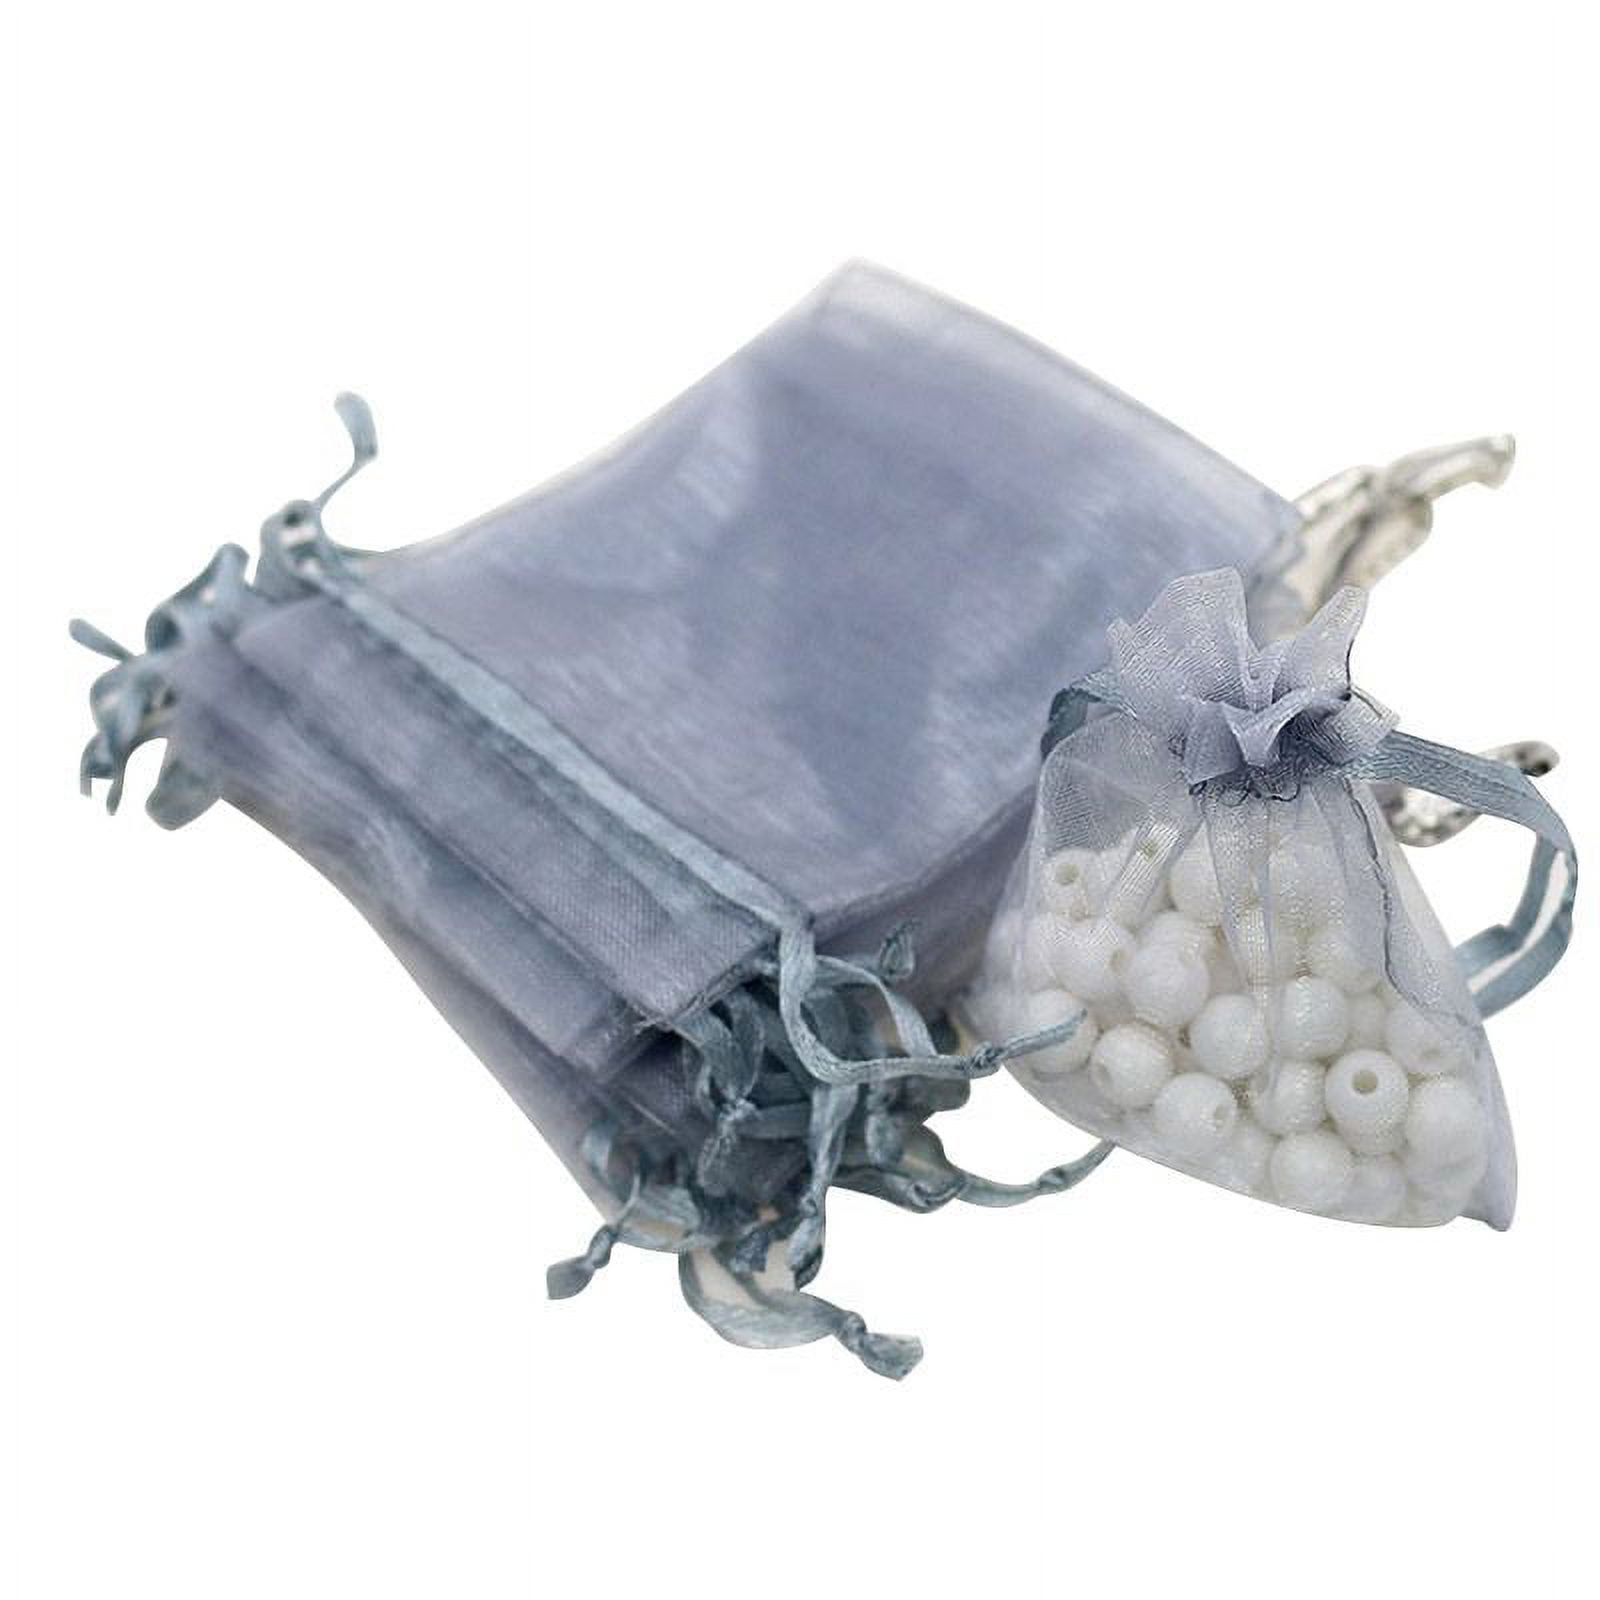 Mandala Crafts 200 Sheer Organza Bags for Wedding Party Favor Bags - Small  Mesh Bags Drawstring Pouch Sachet Bags Jewelry Bags for Small Business – 4